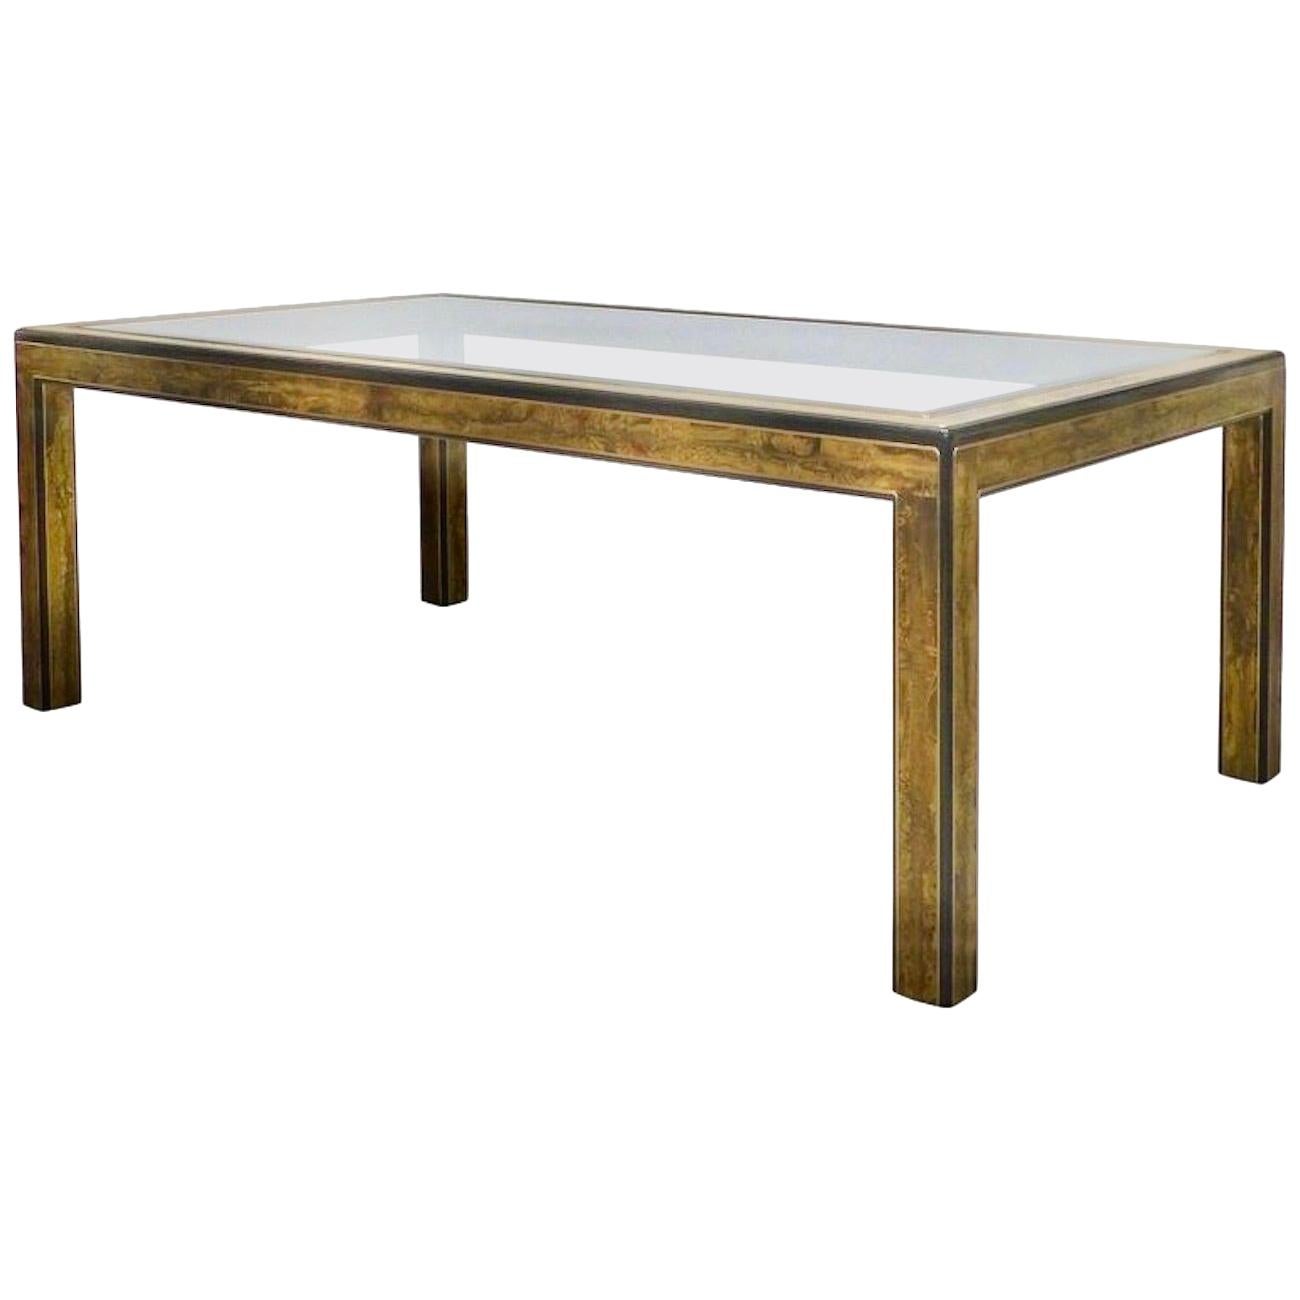 Bernhard Rohne for Mastercraft Acid Etched Brass Dining Table